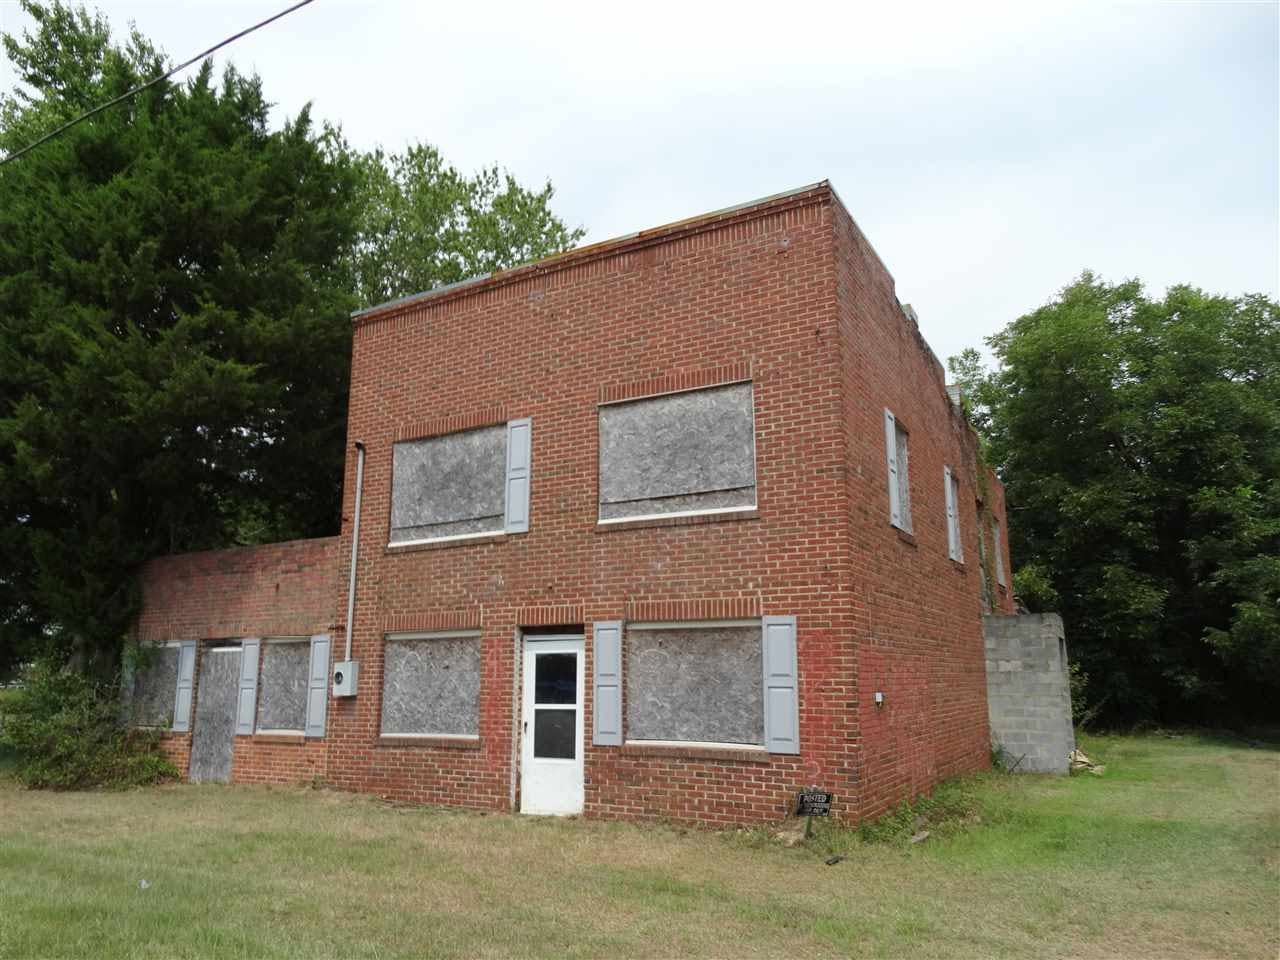 Exterior Front of Brick 2-Story Building